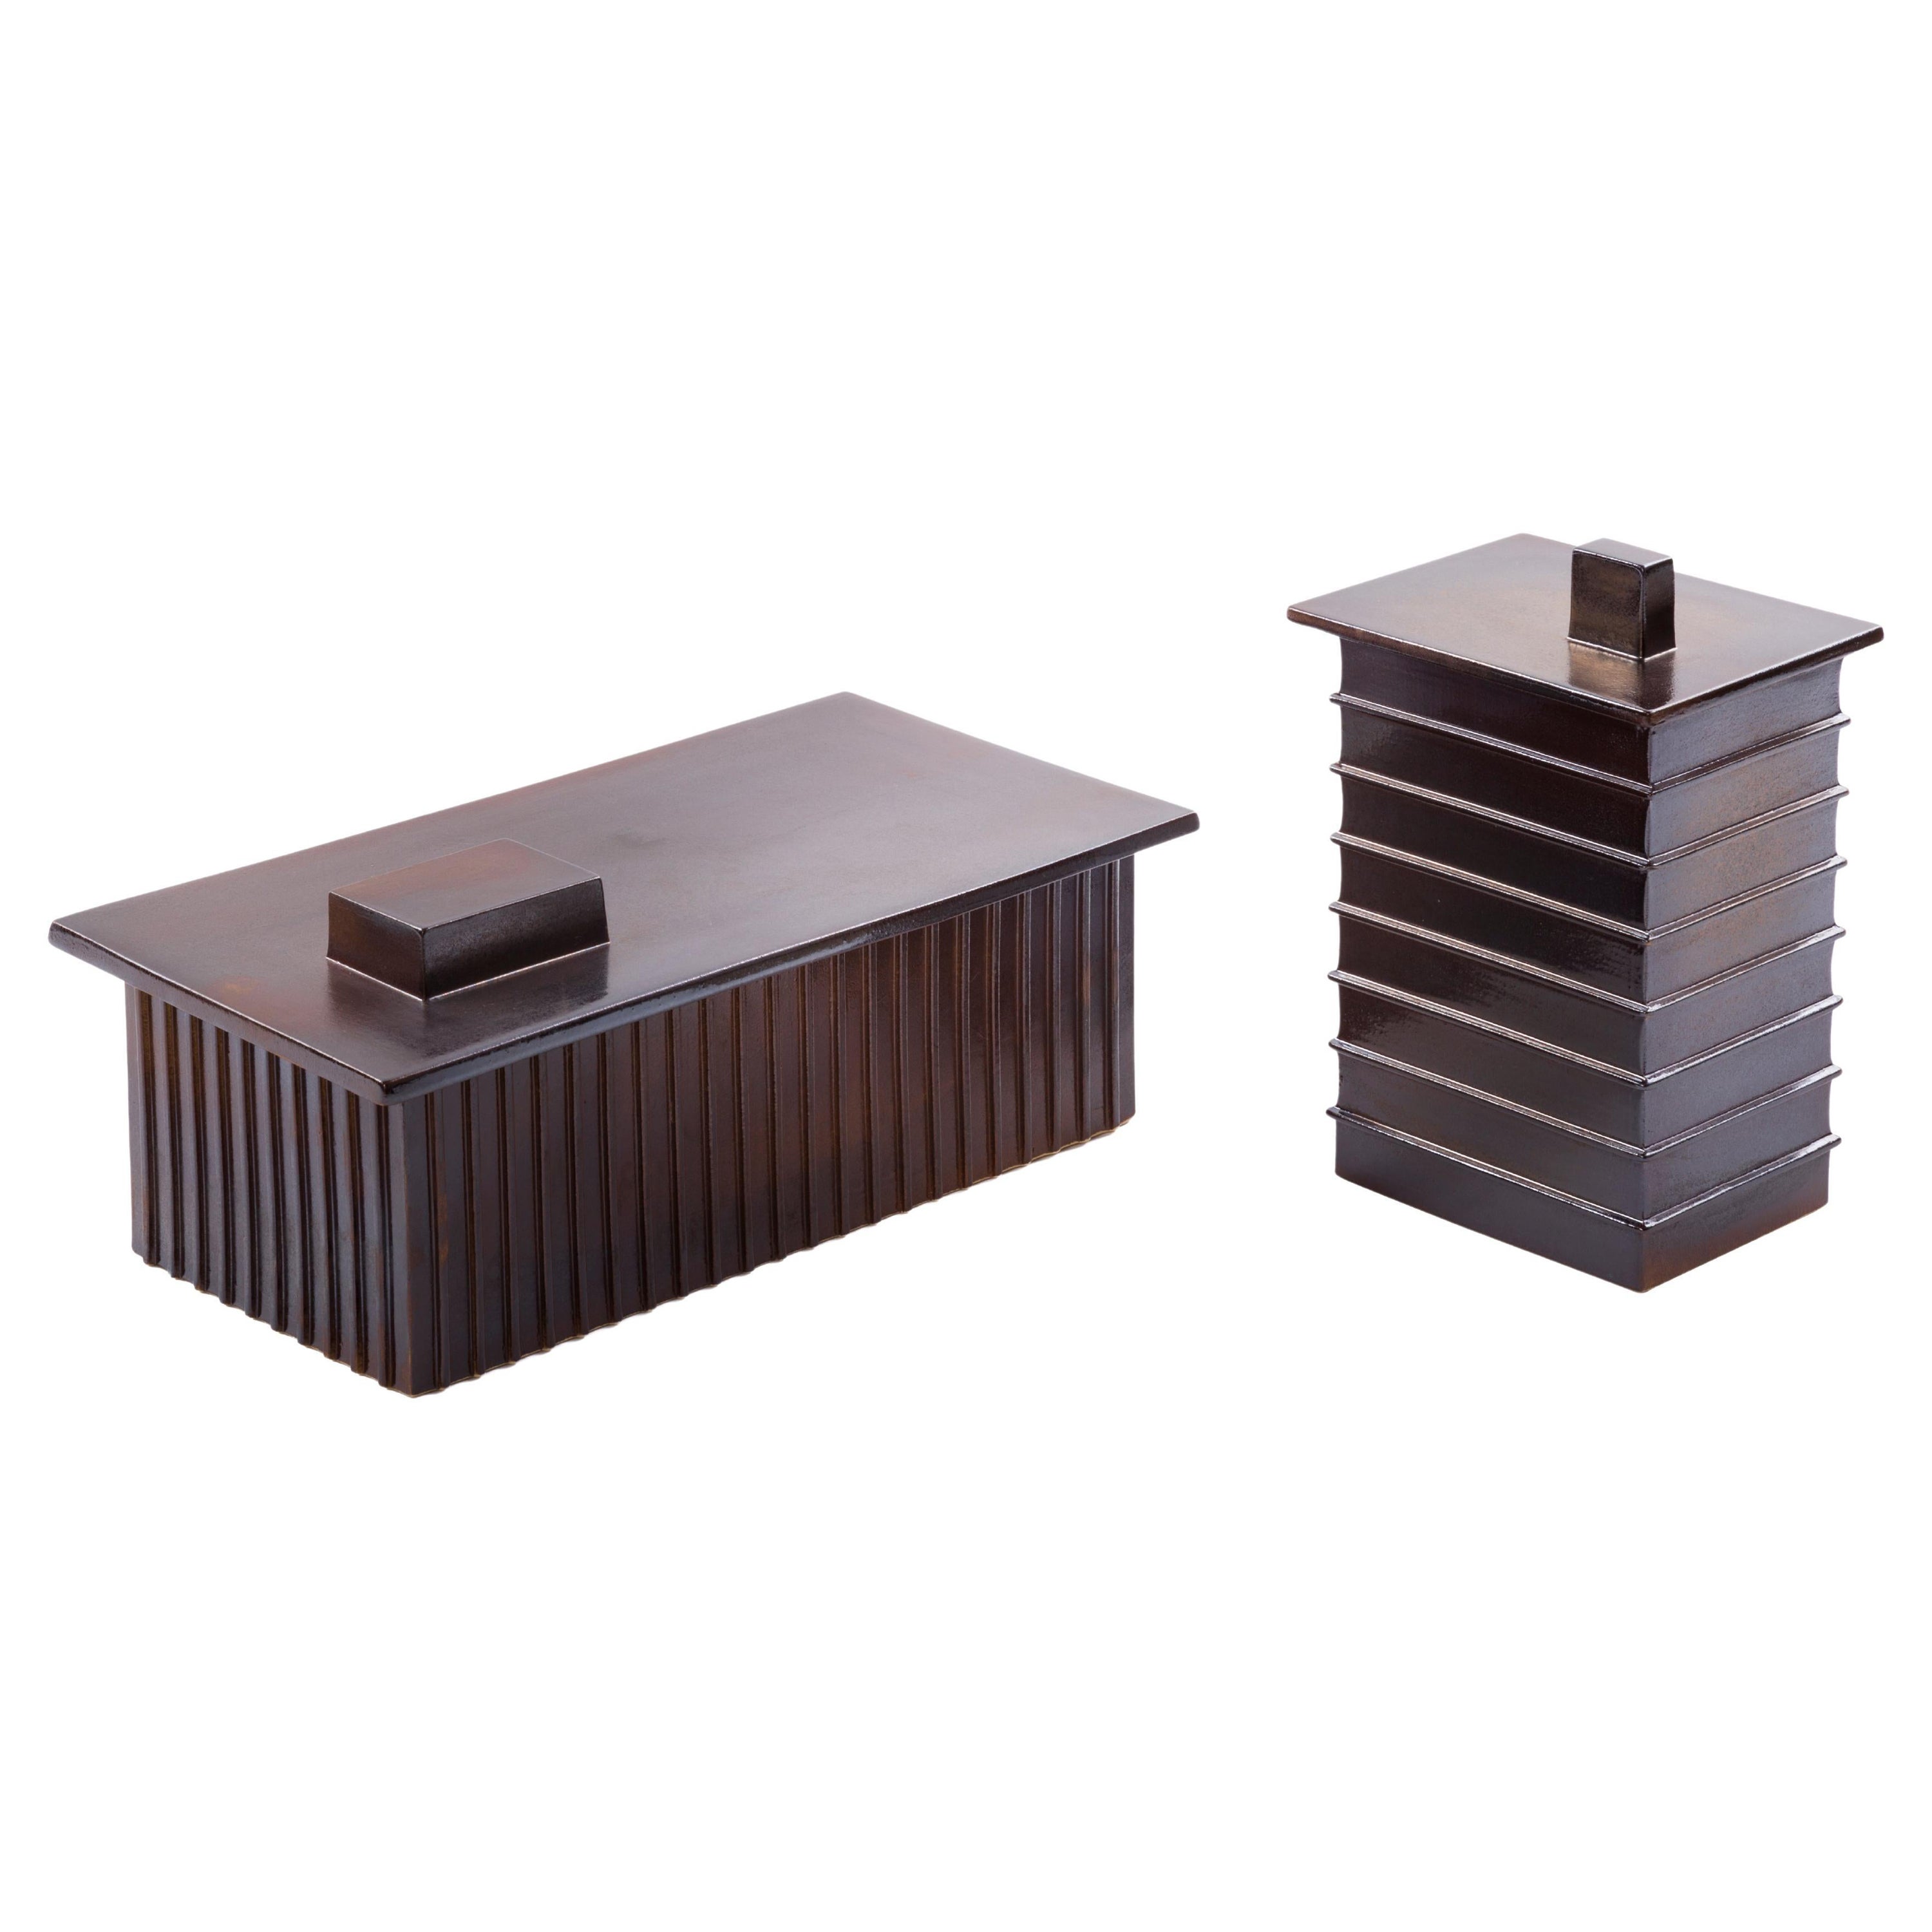 Set of 2 Building Boxes by Pulpo For Sale